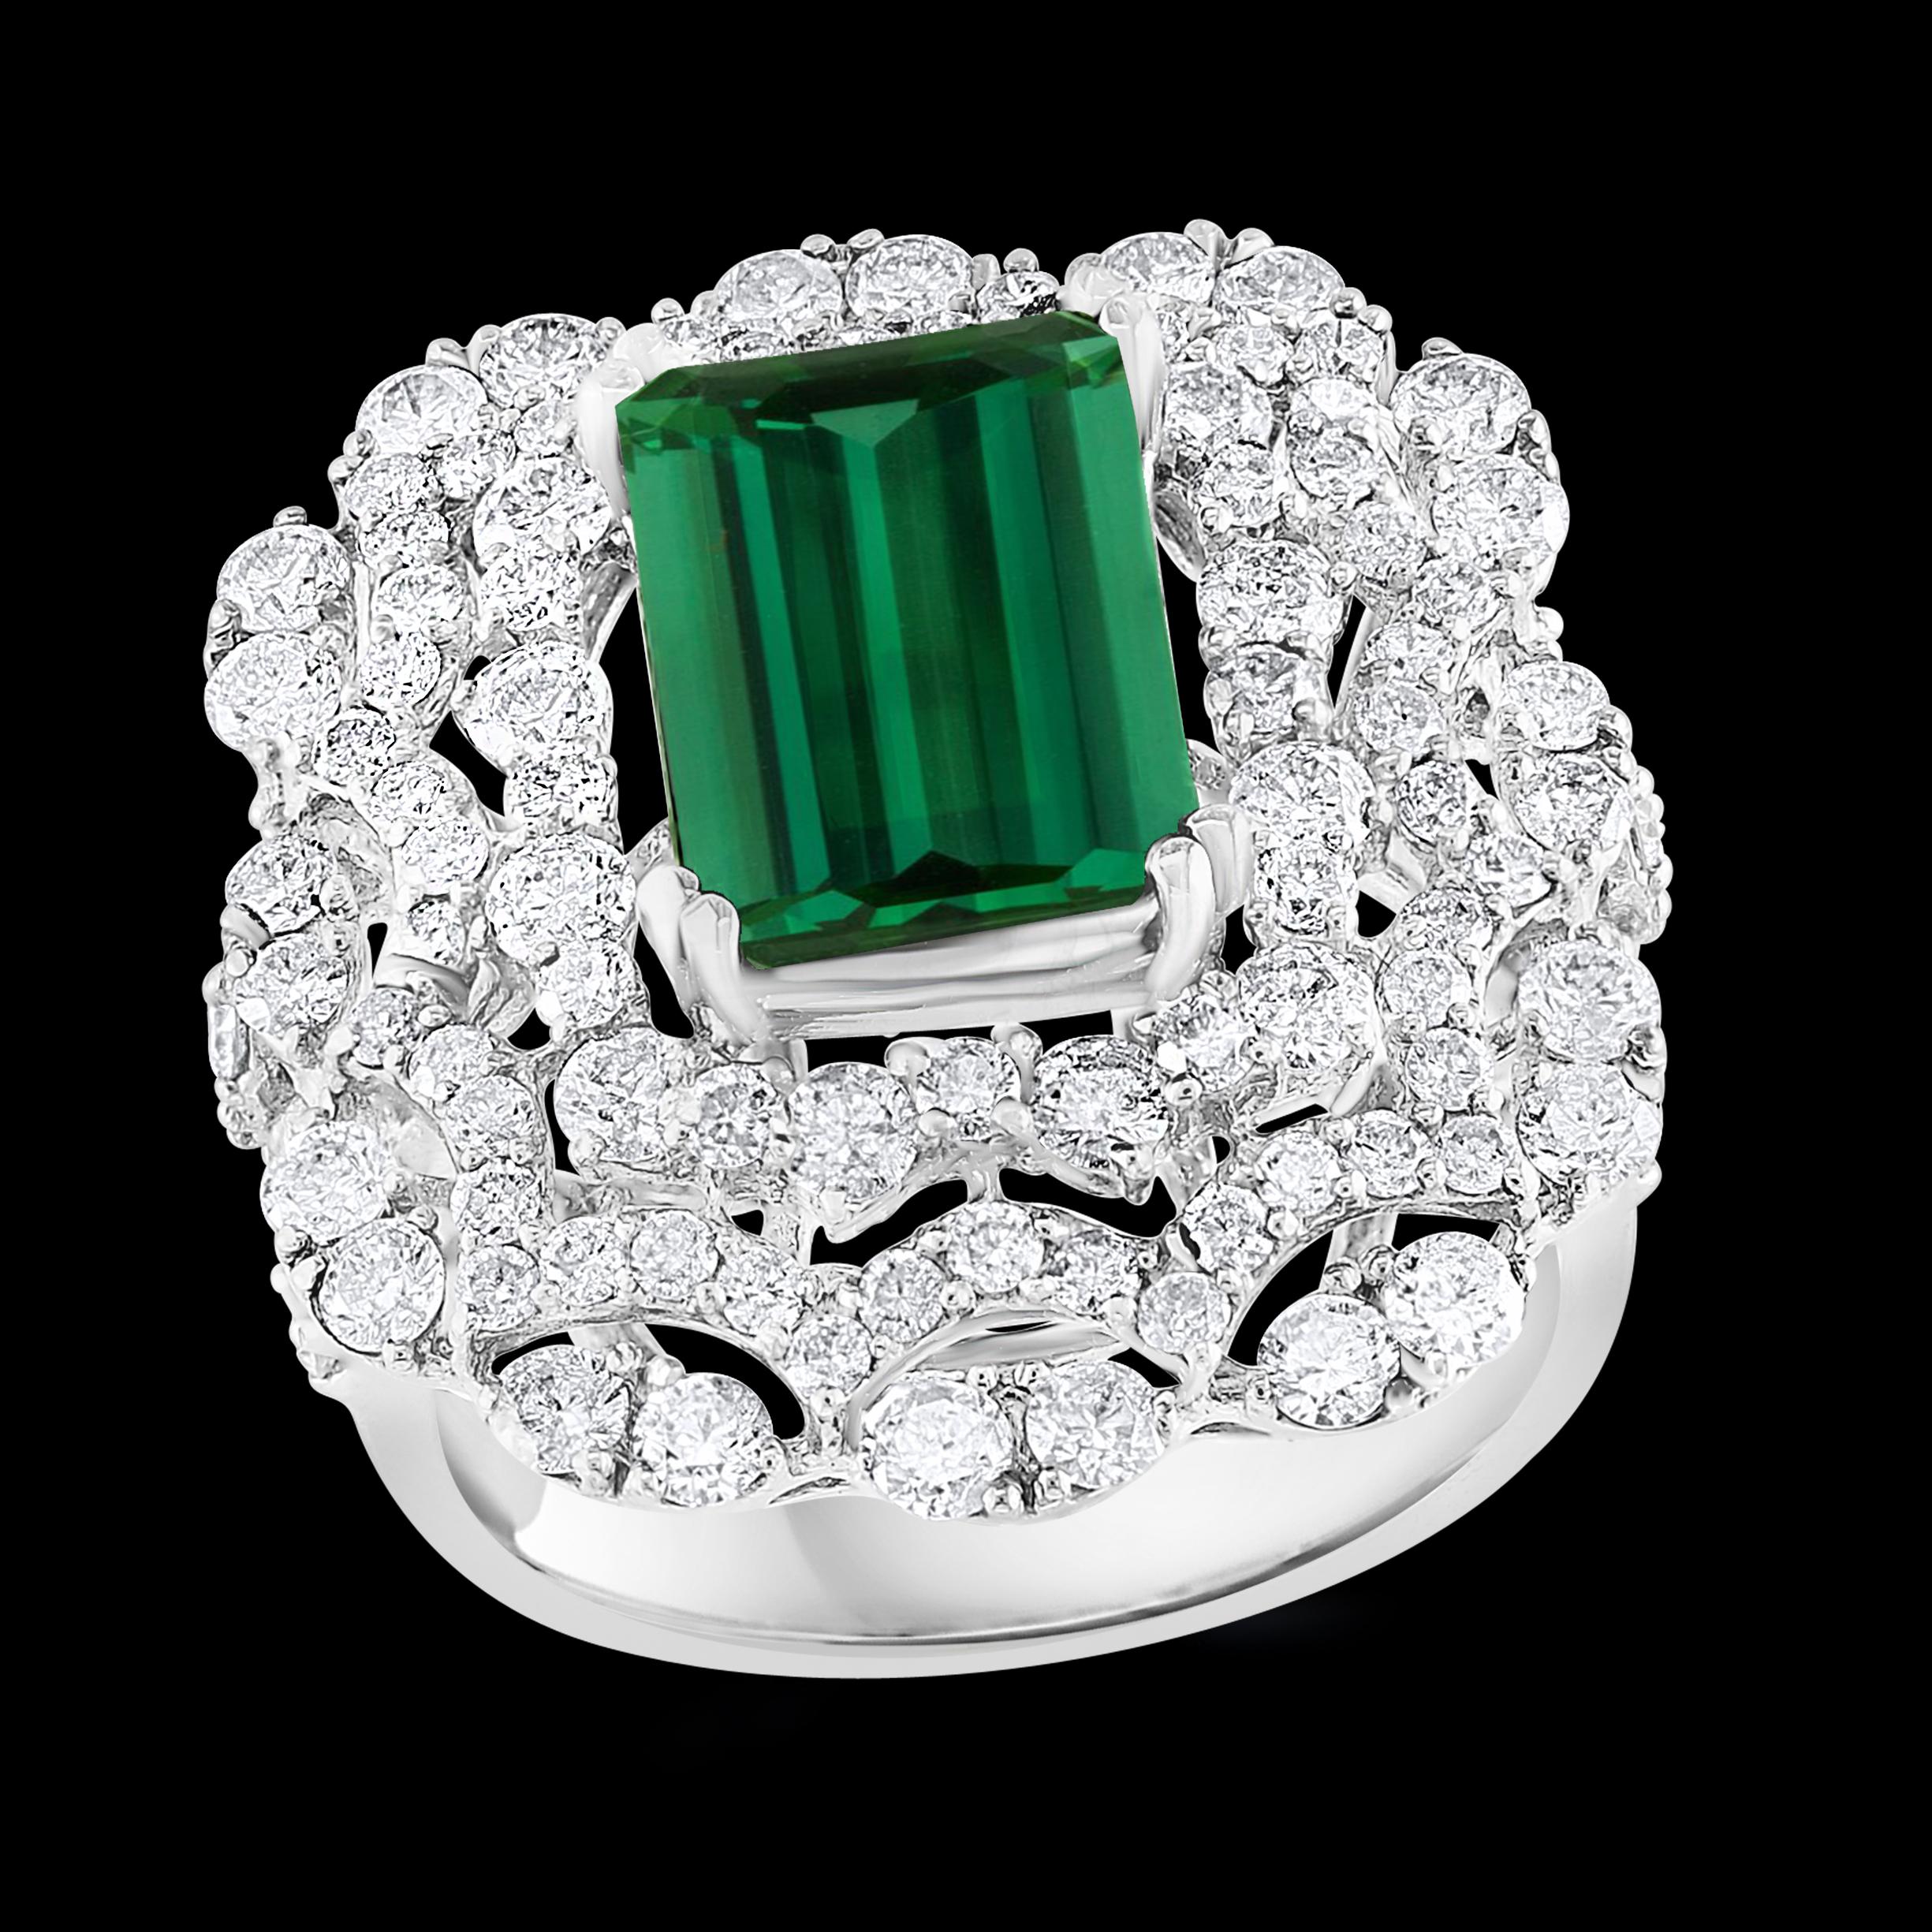 Approximately 6.5  Carat Green Tourmaline & 2.5 Carat Diamond Cocktail Ring 18 Karat White Gold Estate
This spectacular Cocktail ring   consisting of a single Oval  Shape Green Tourmaline  7.75  Carat.  The  Green Tourmaline  is surrounded by